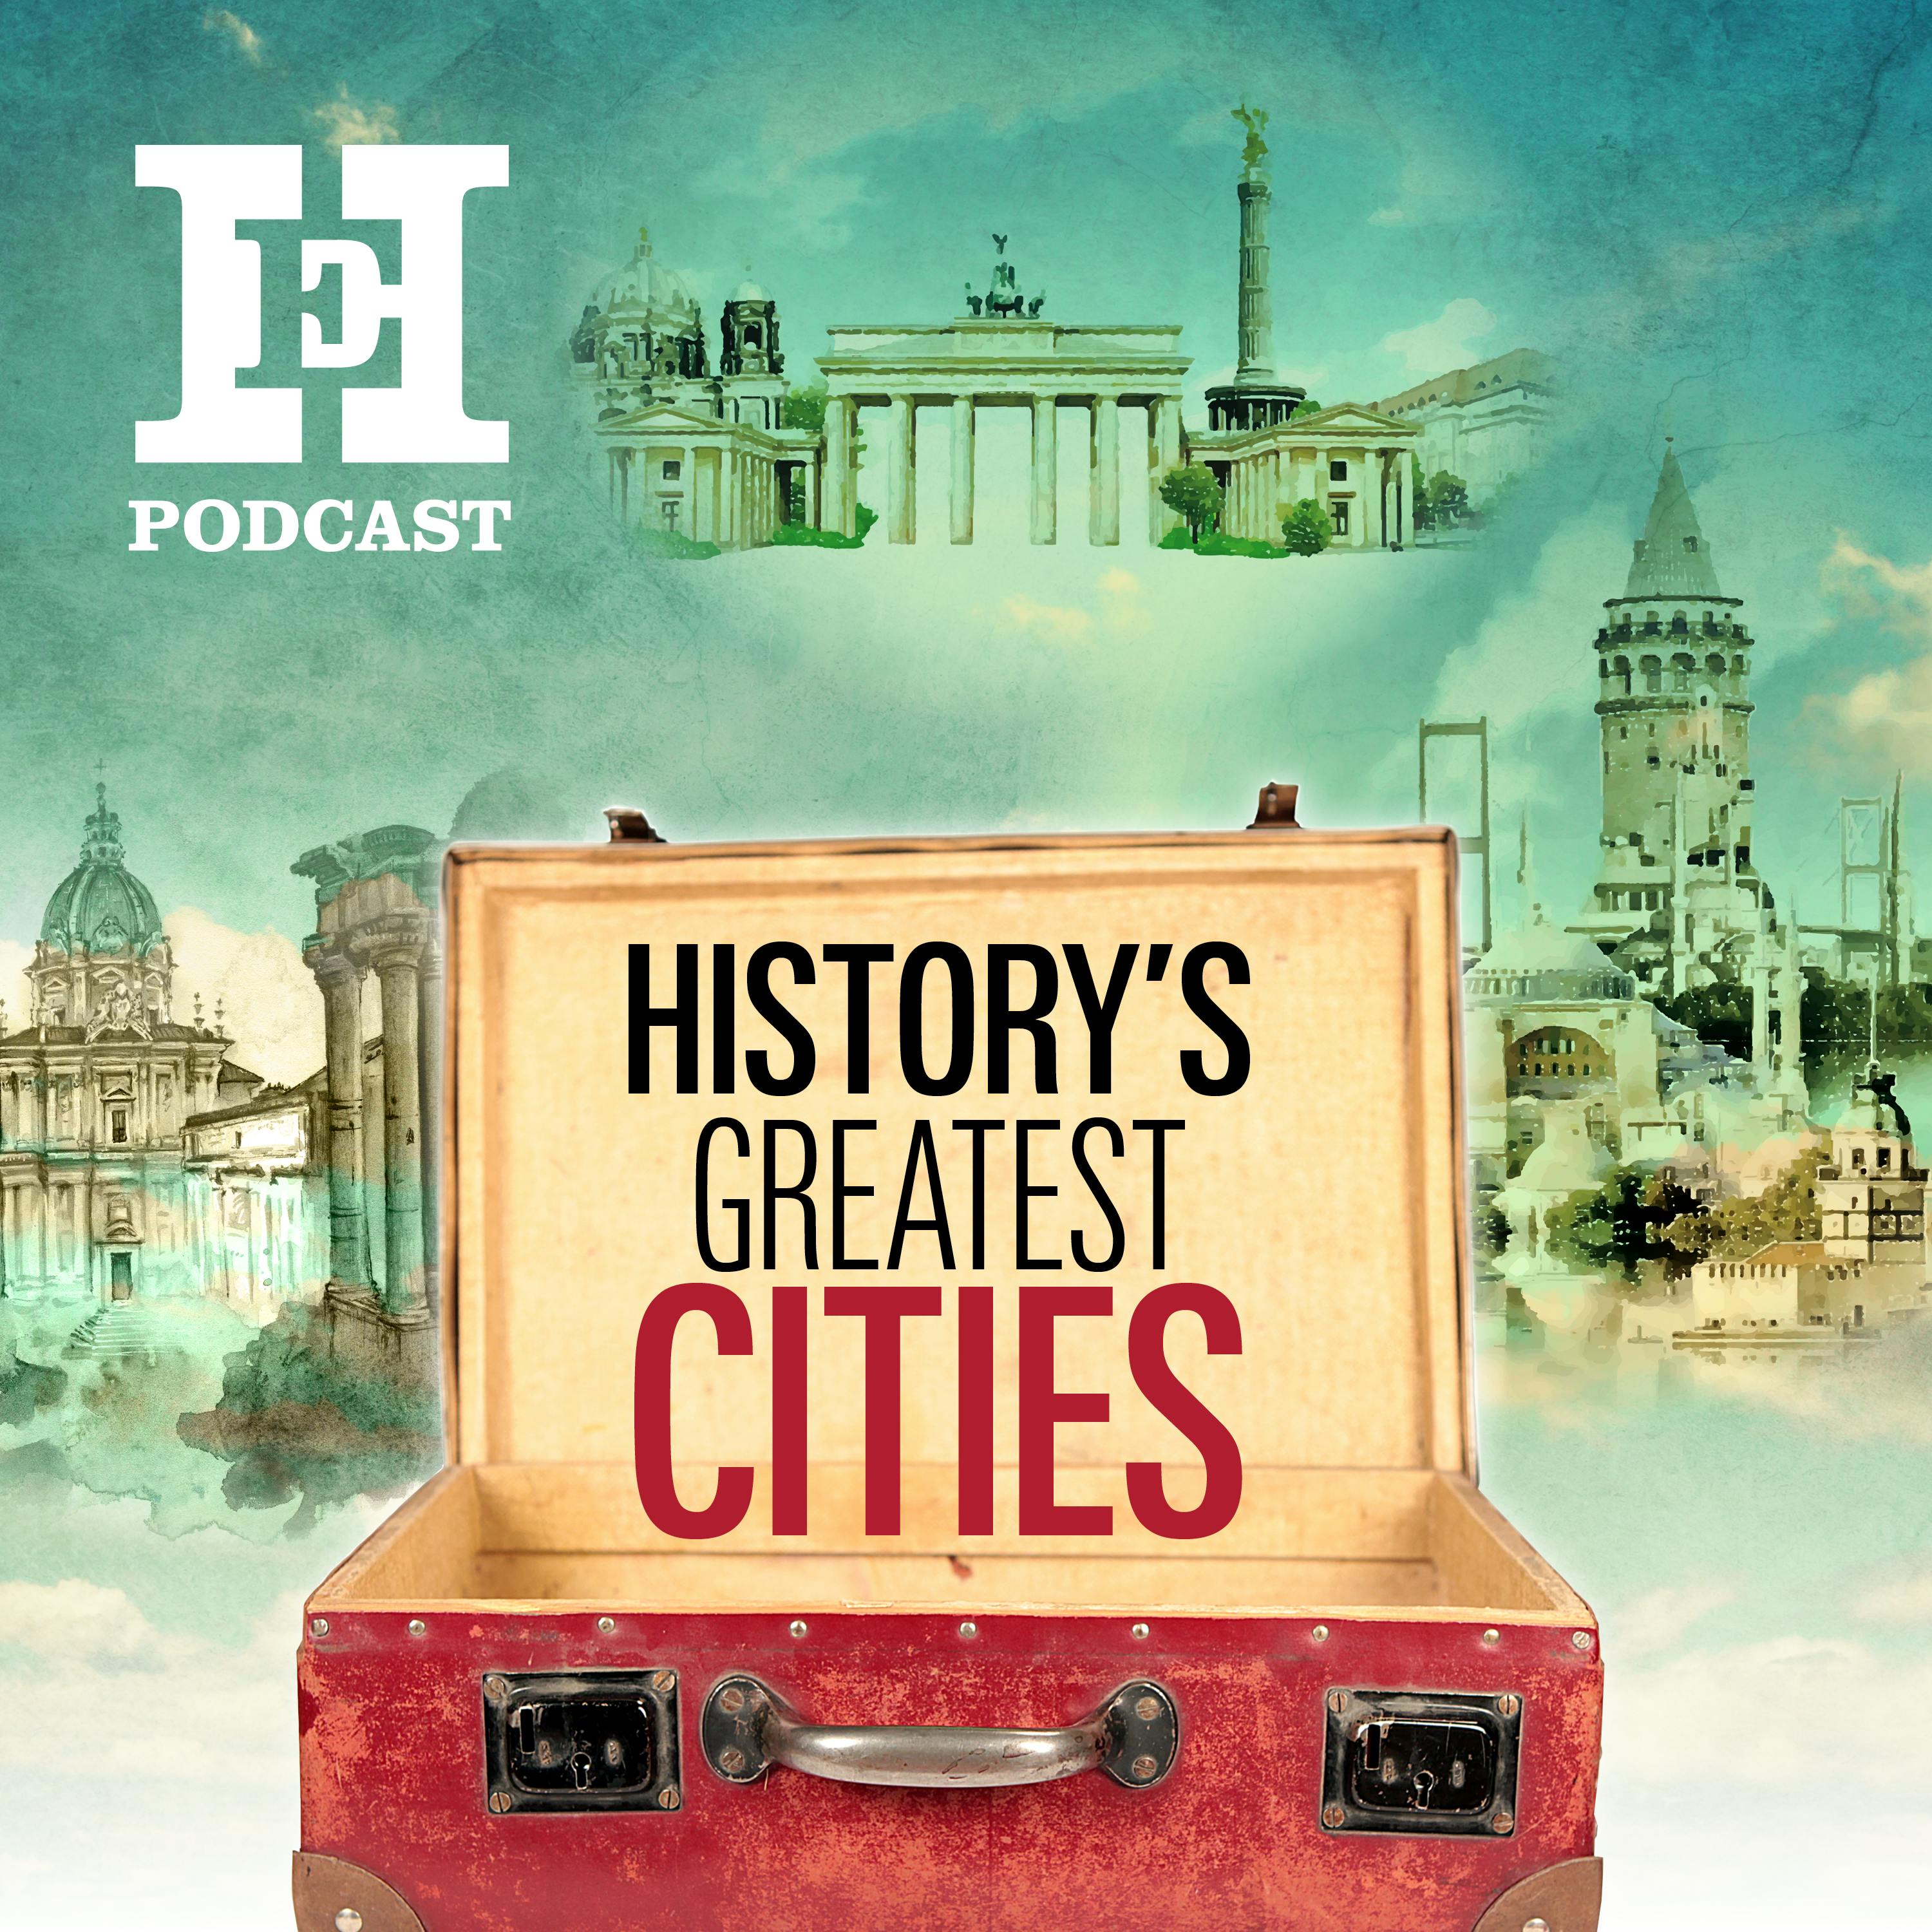 History's greatest cities | Trailer